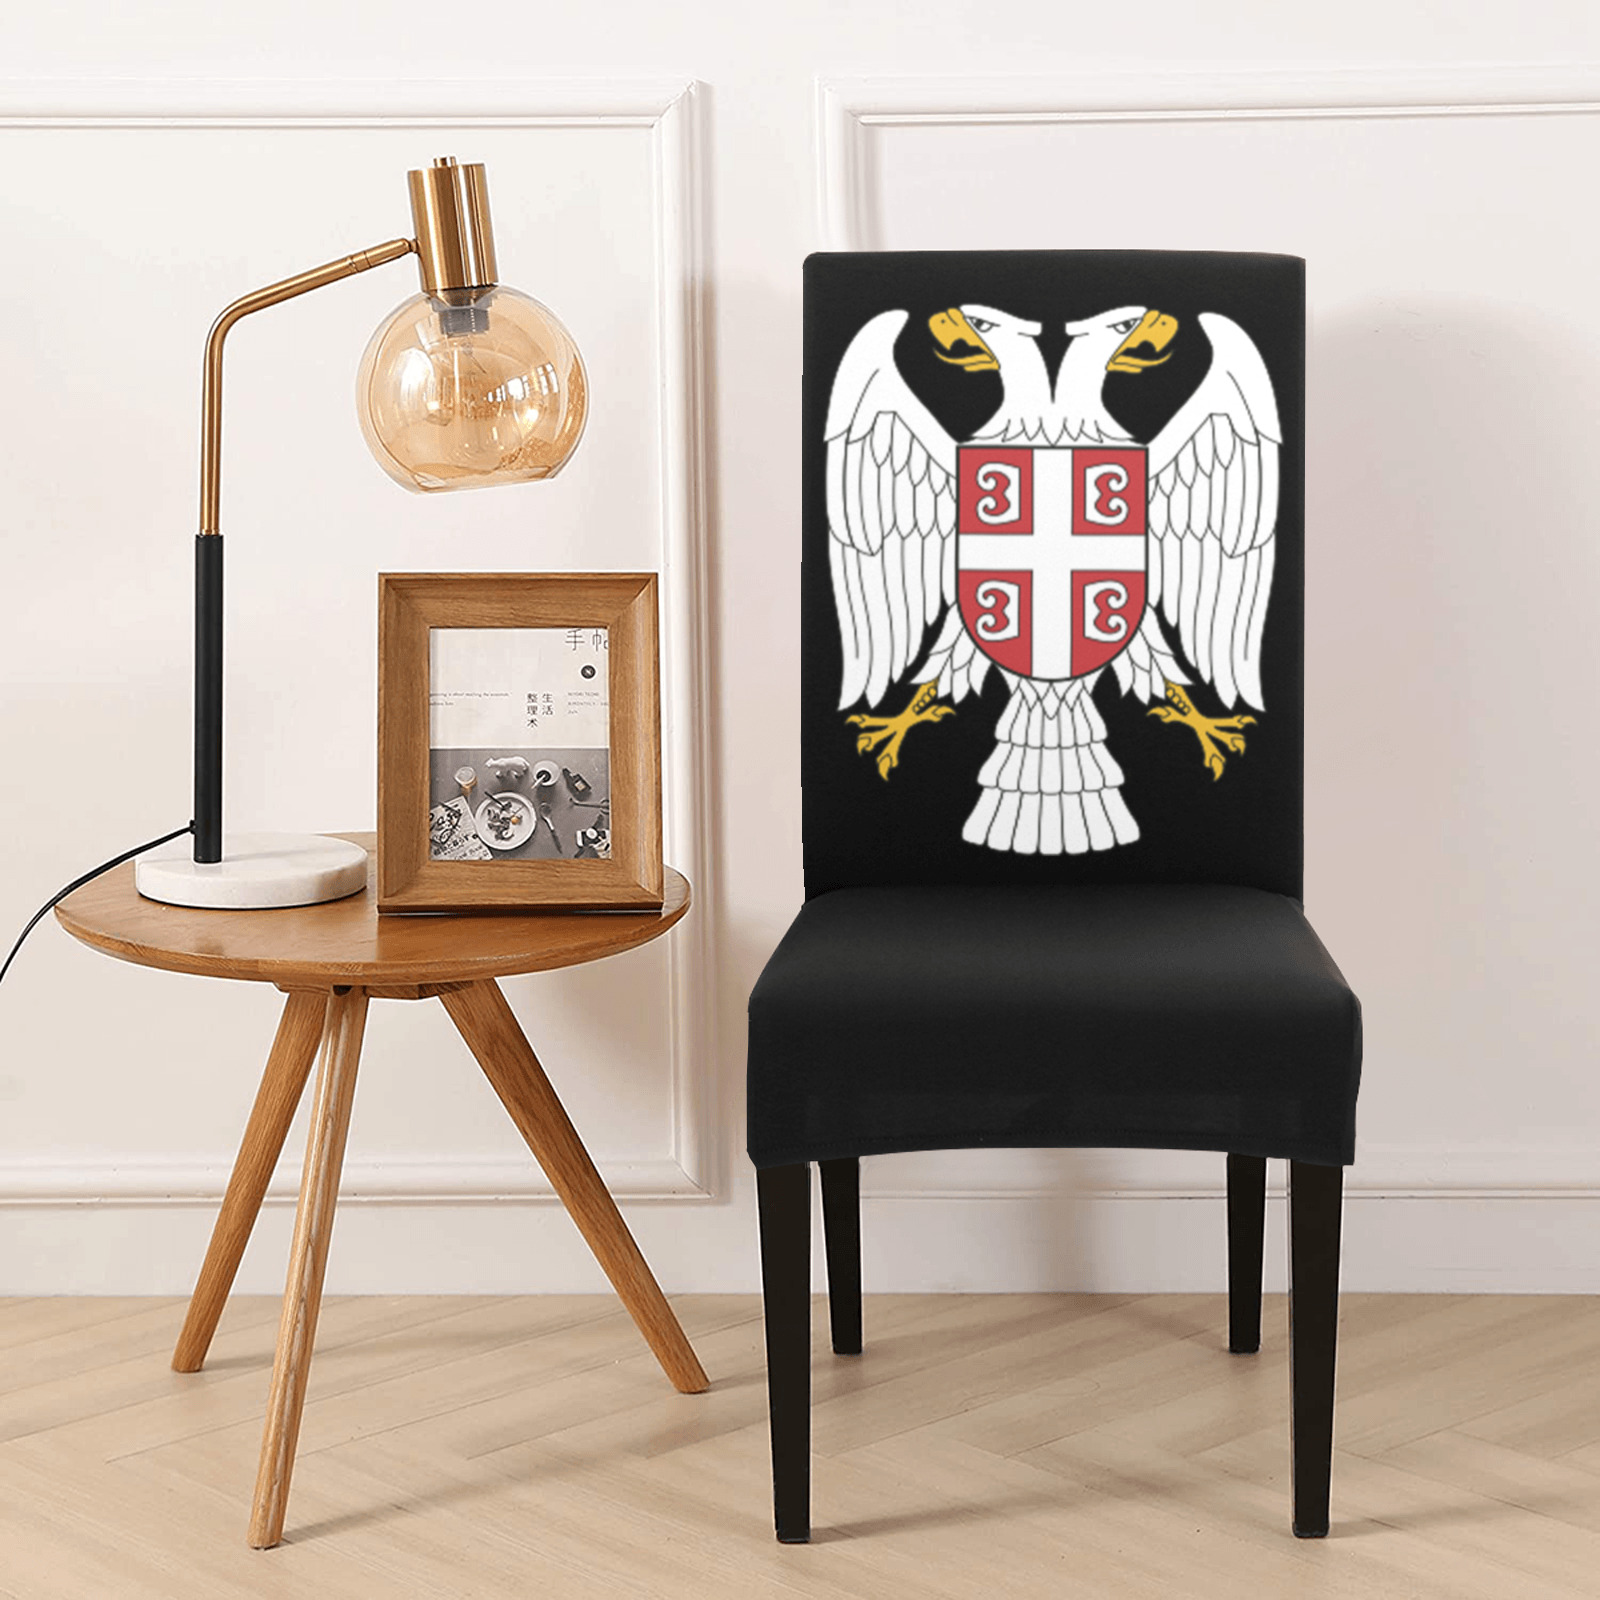 Serbia flag Removable Dining Chair Cover